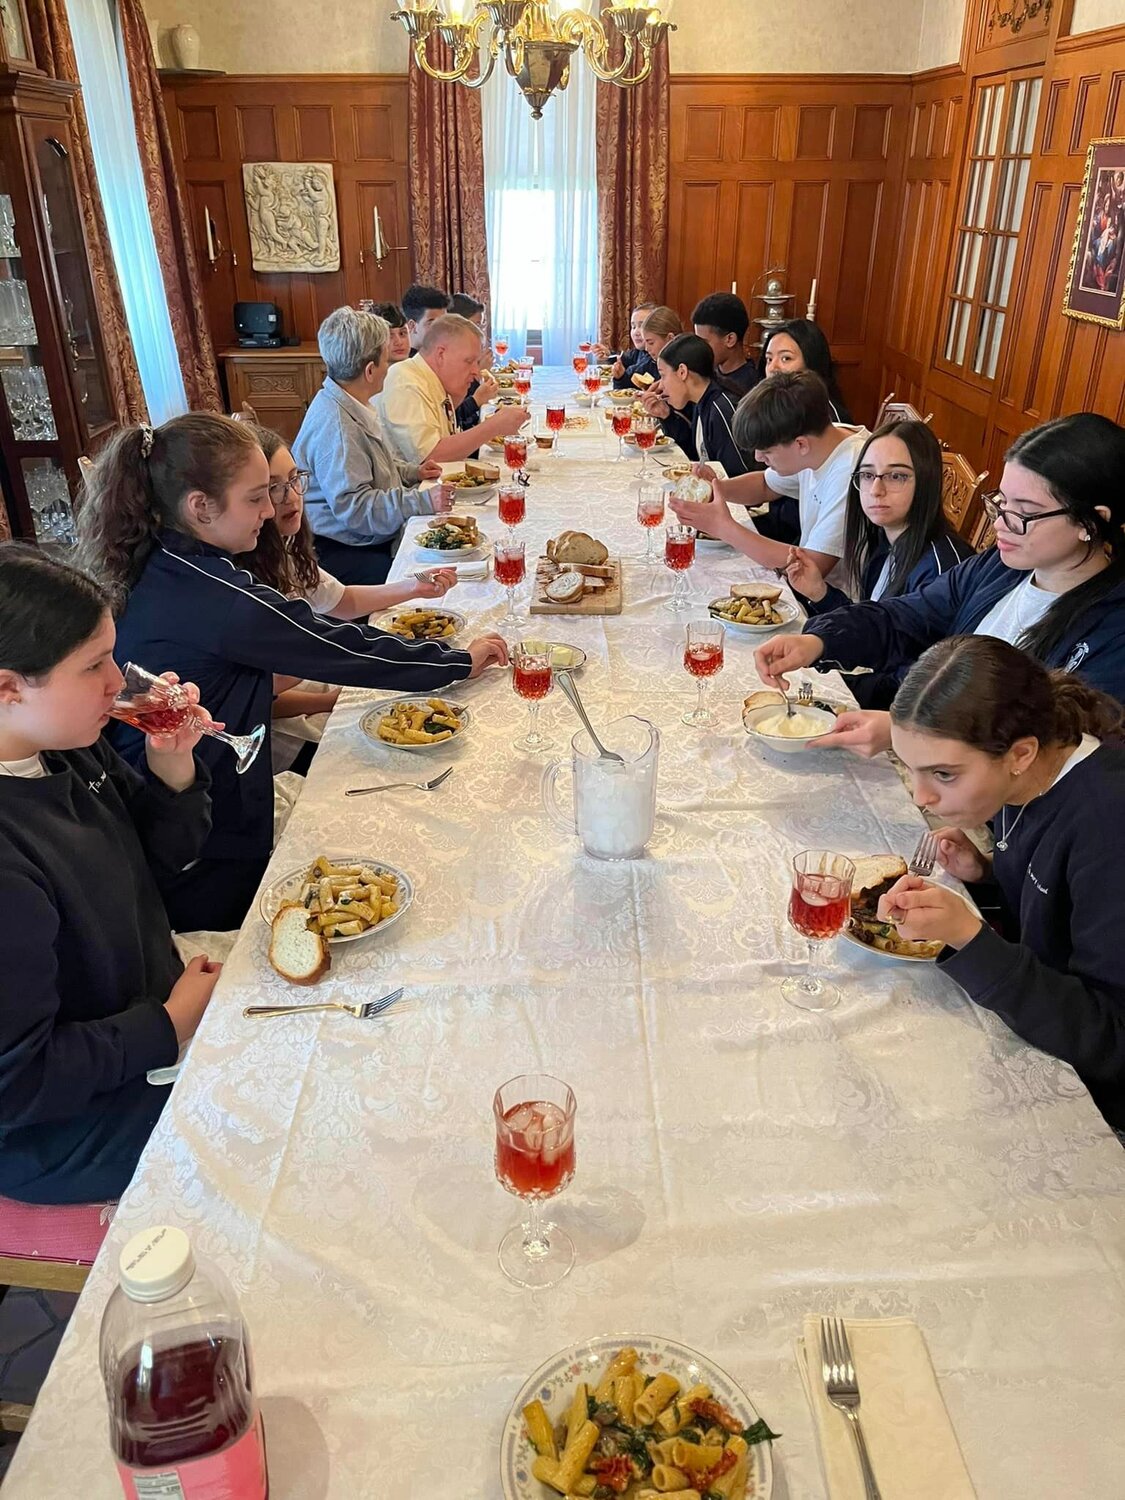 Last week, the Student Council of St. Mary School, Cranston, were treated to a delicious lunch, prepared by their pastor Father Michael A. Sisco.